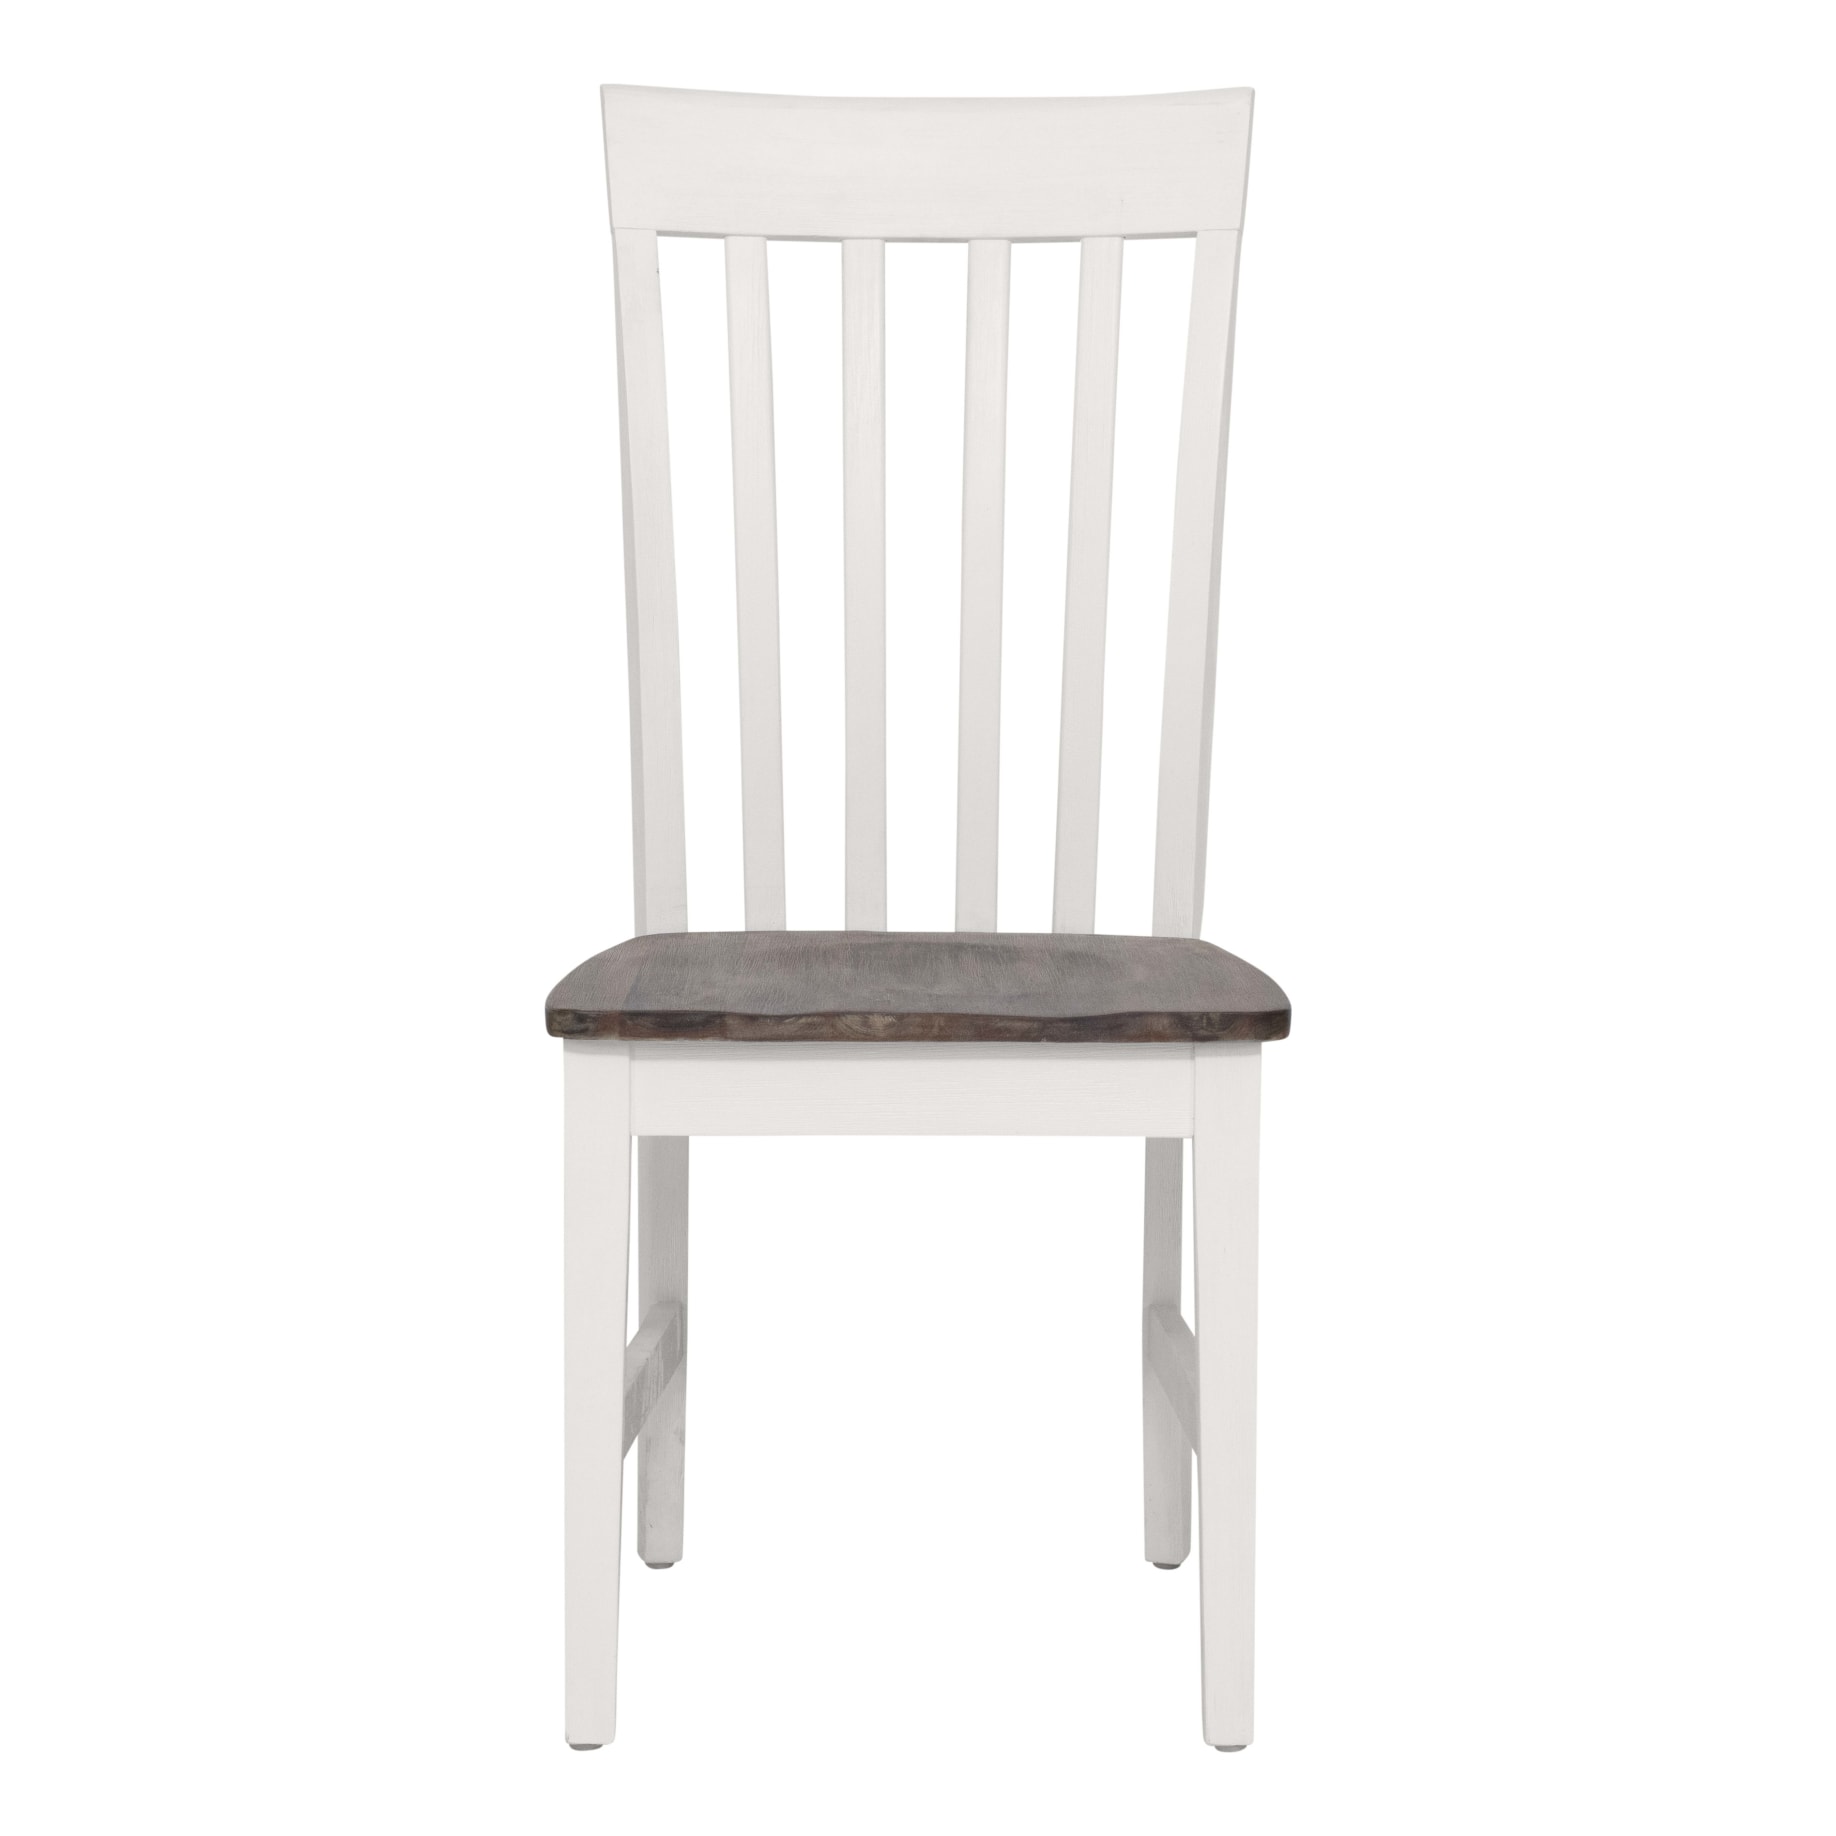 Hamptons Dining Chair in Acacia Two Tone